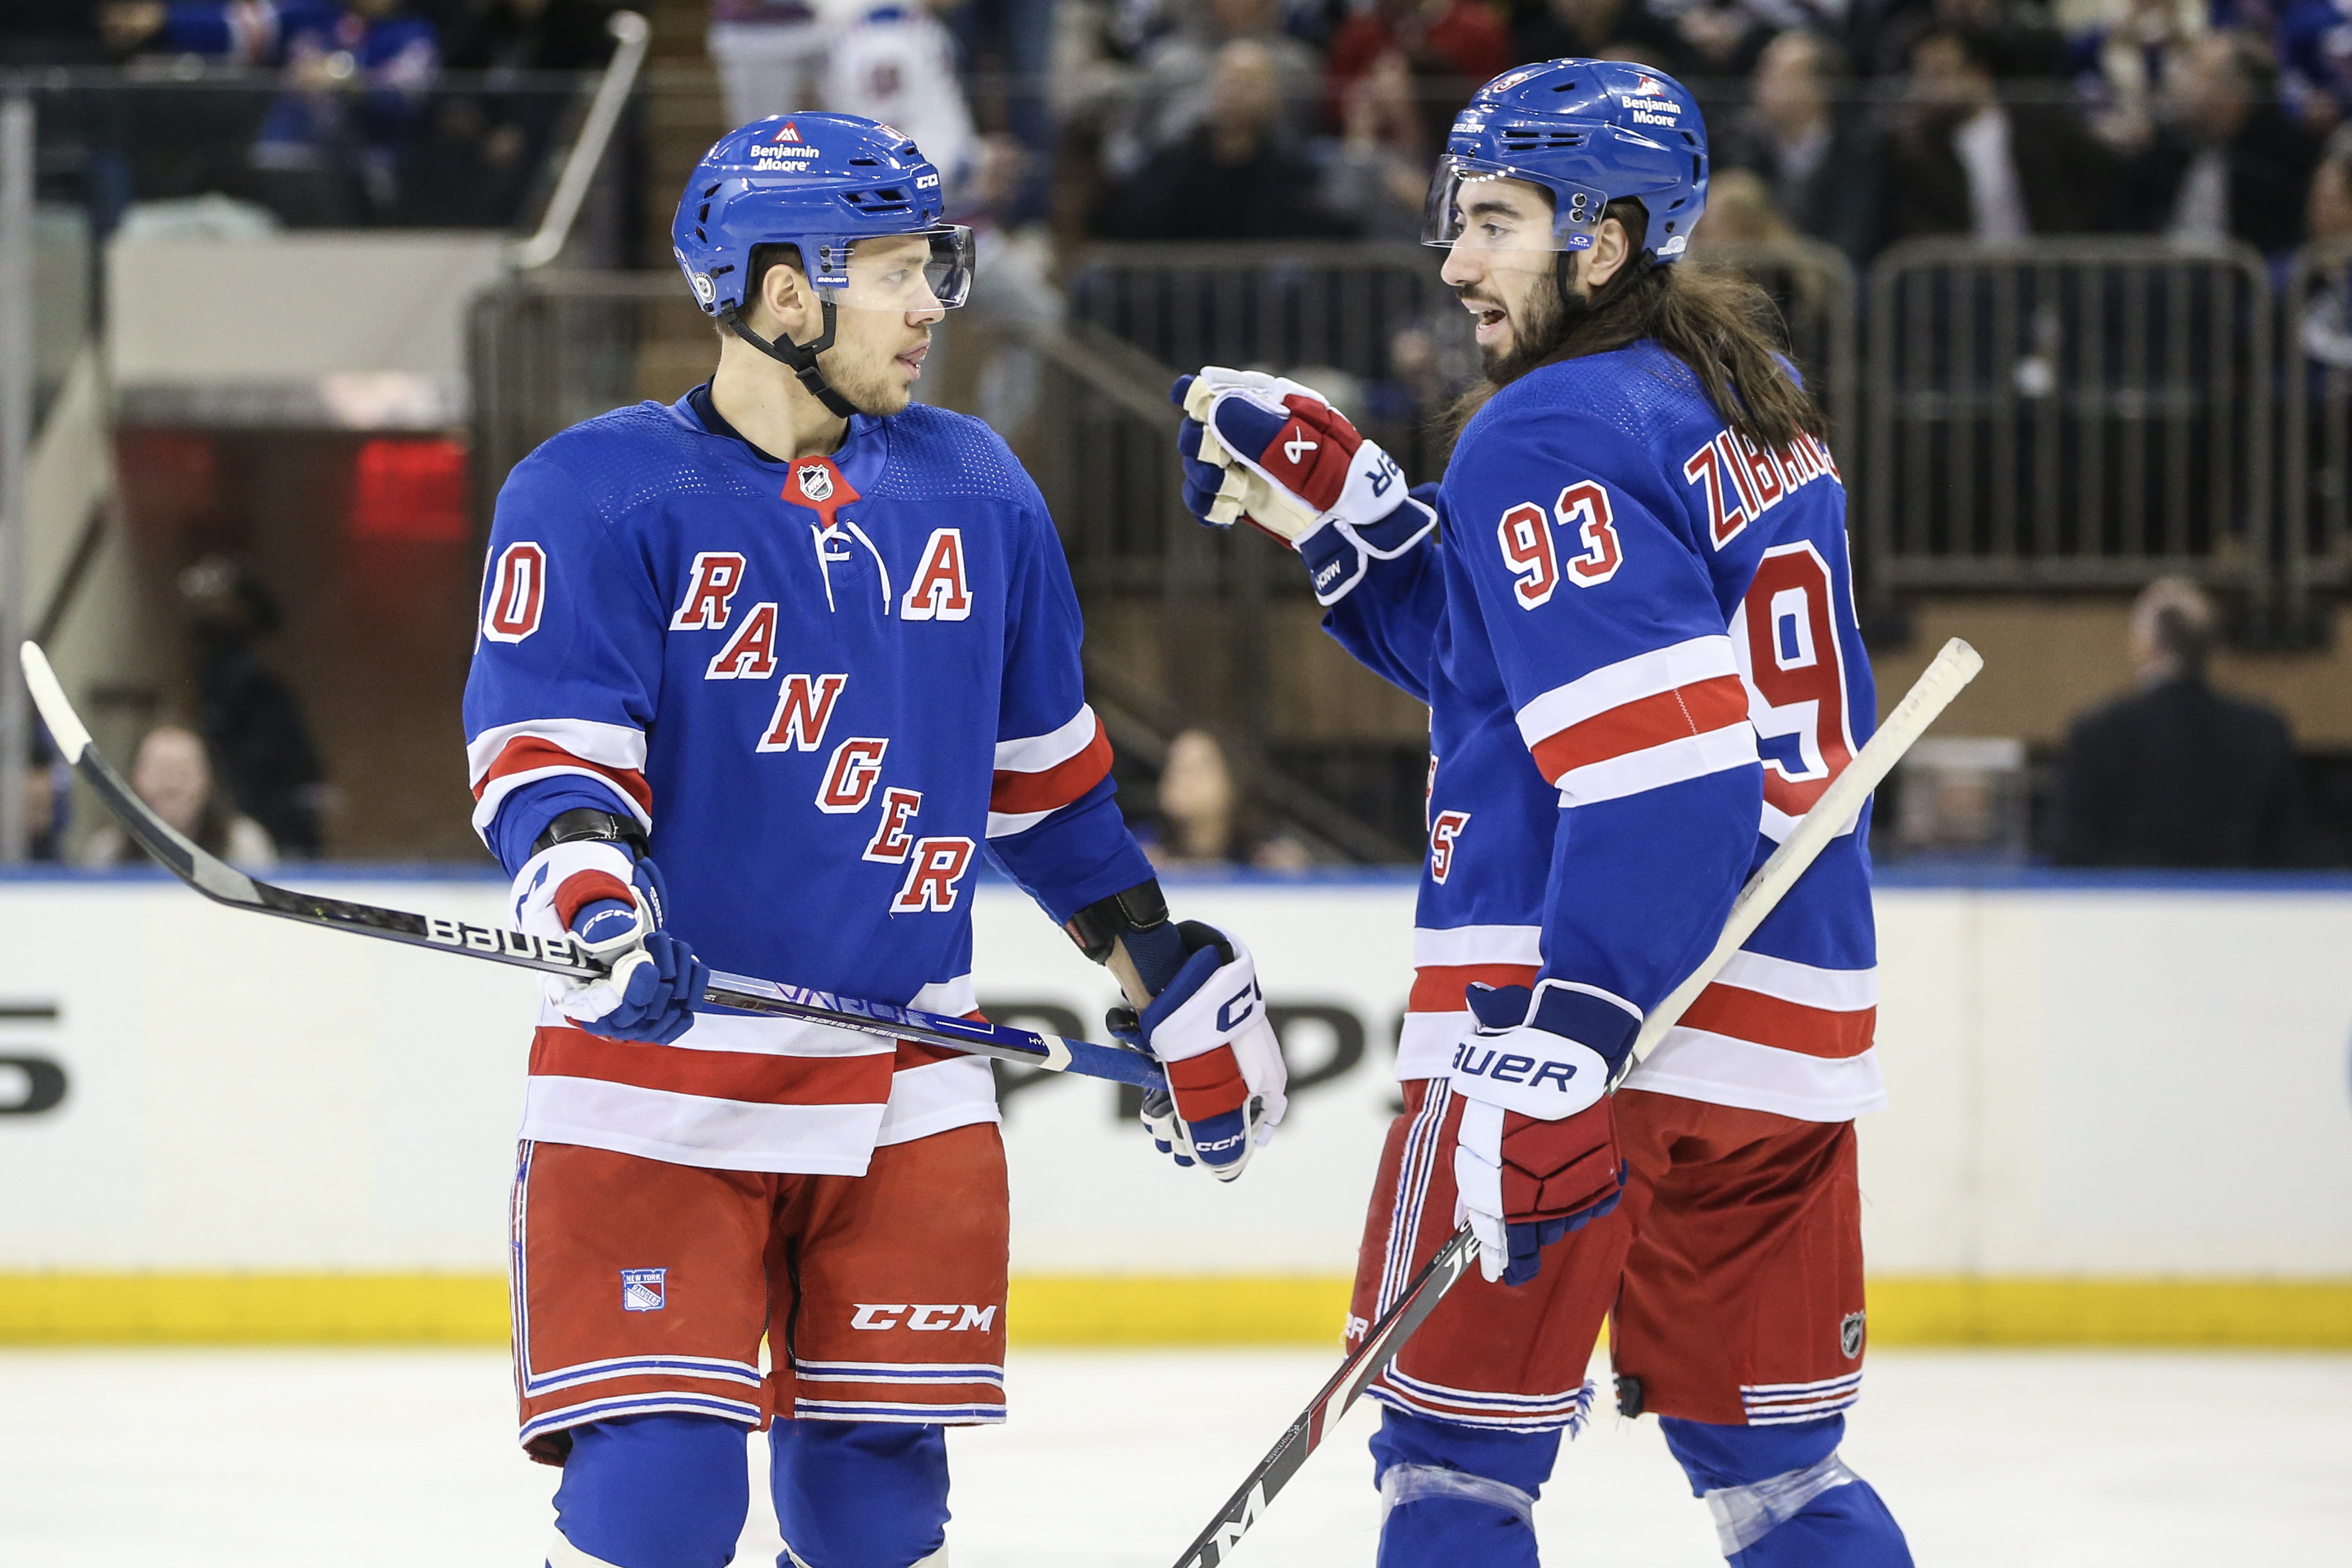 New York Rangers have lost their way after impressive start to the